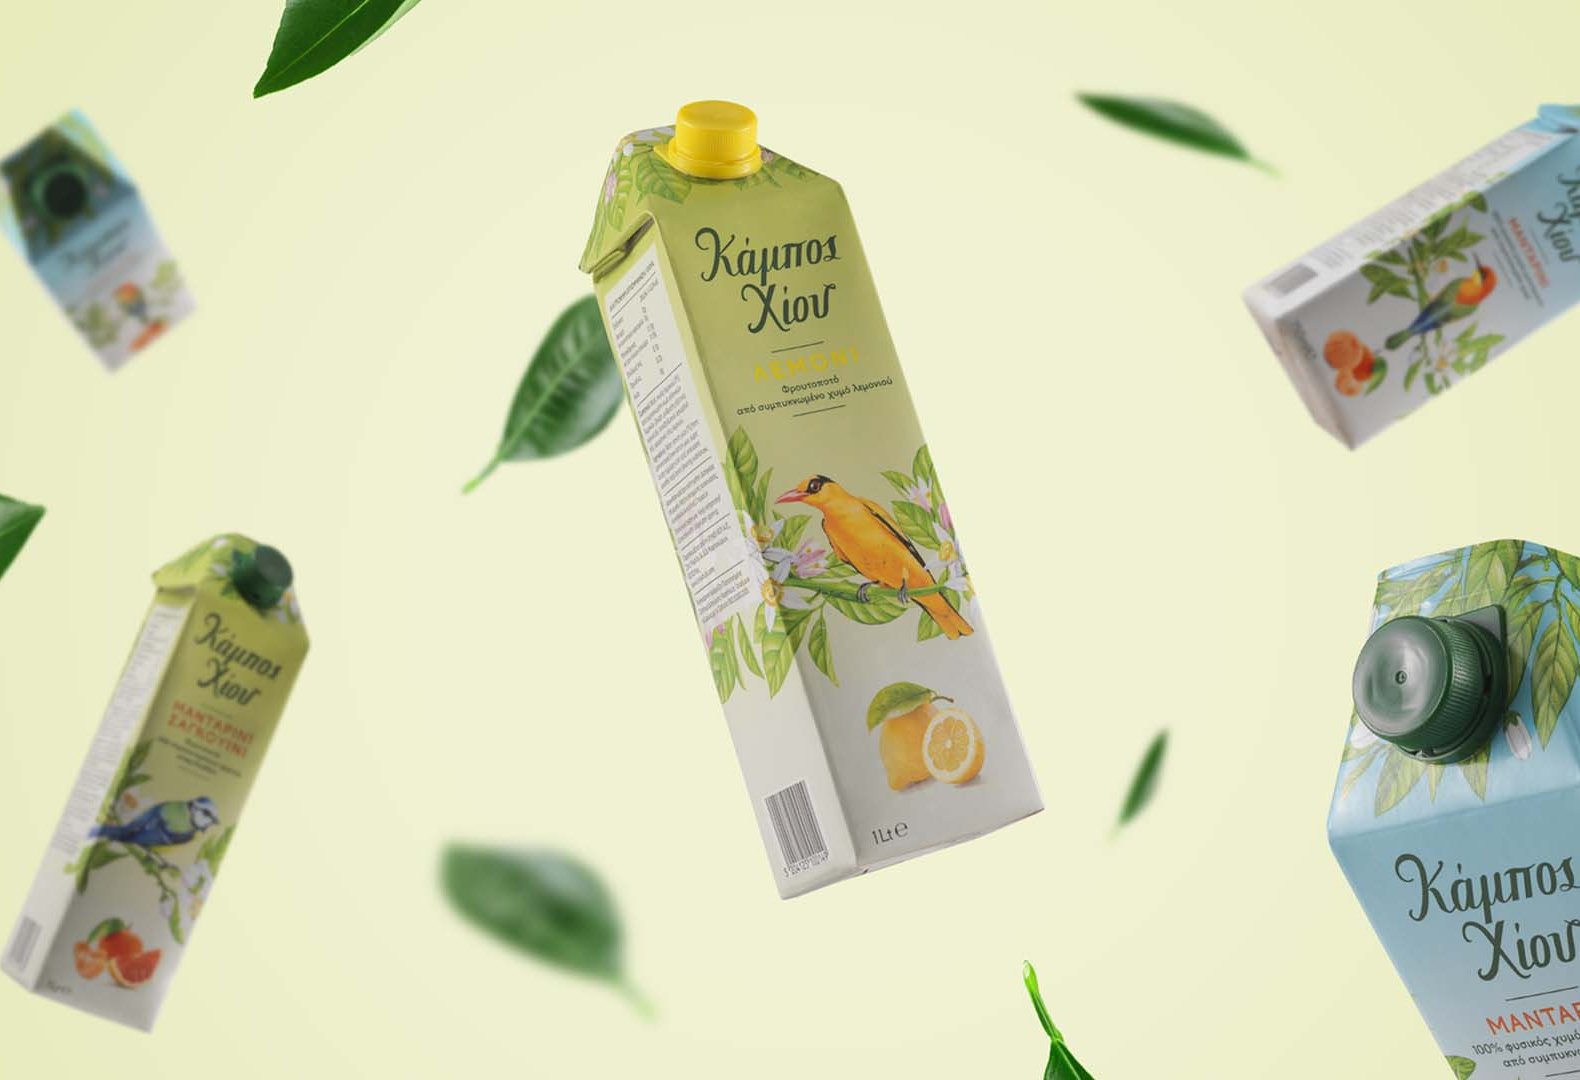 Chios Gardens juices and fruit drinks rebranding on Tetra Pak containers floating around tree leaves